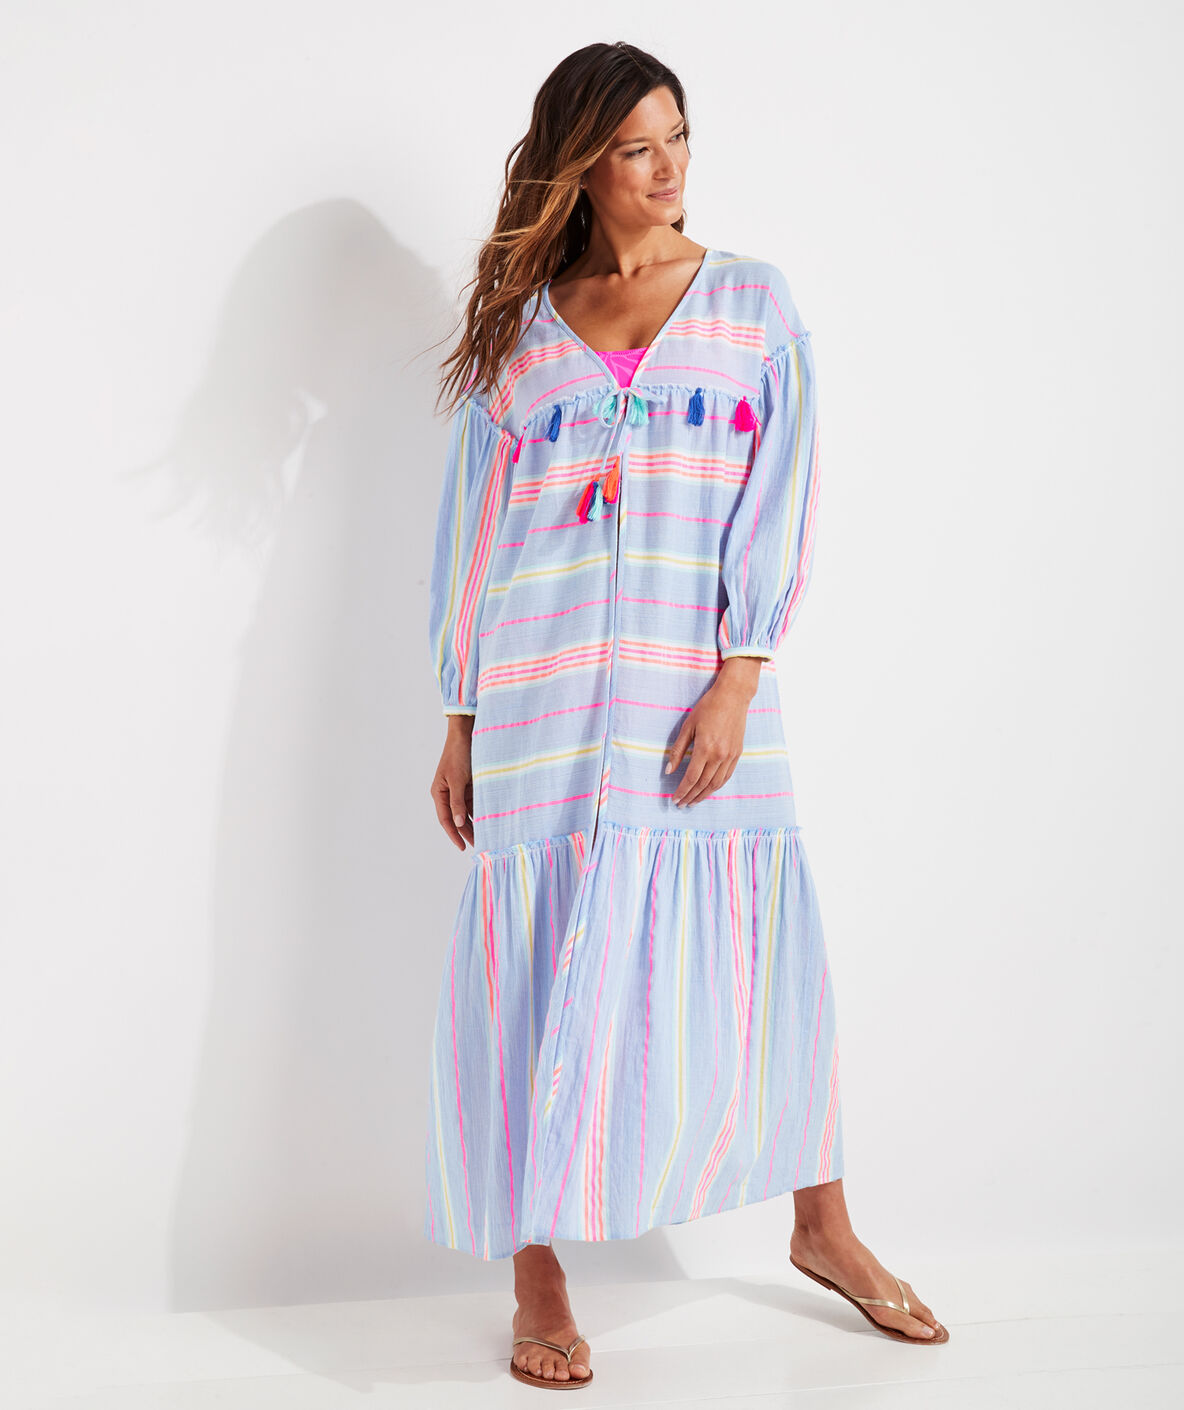 Shop Beachy Stripe TieFront CoverUp at vineyard vines